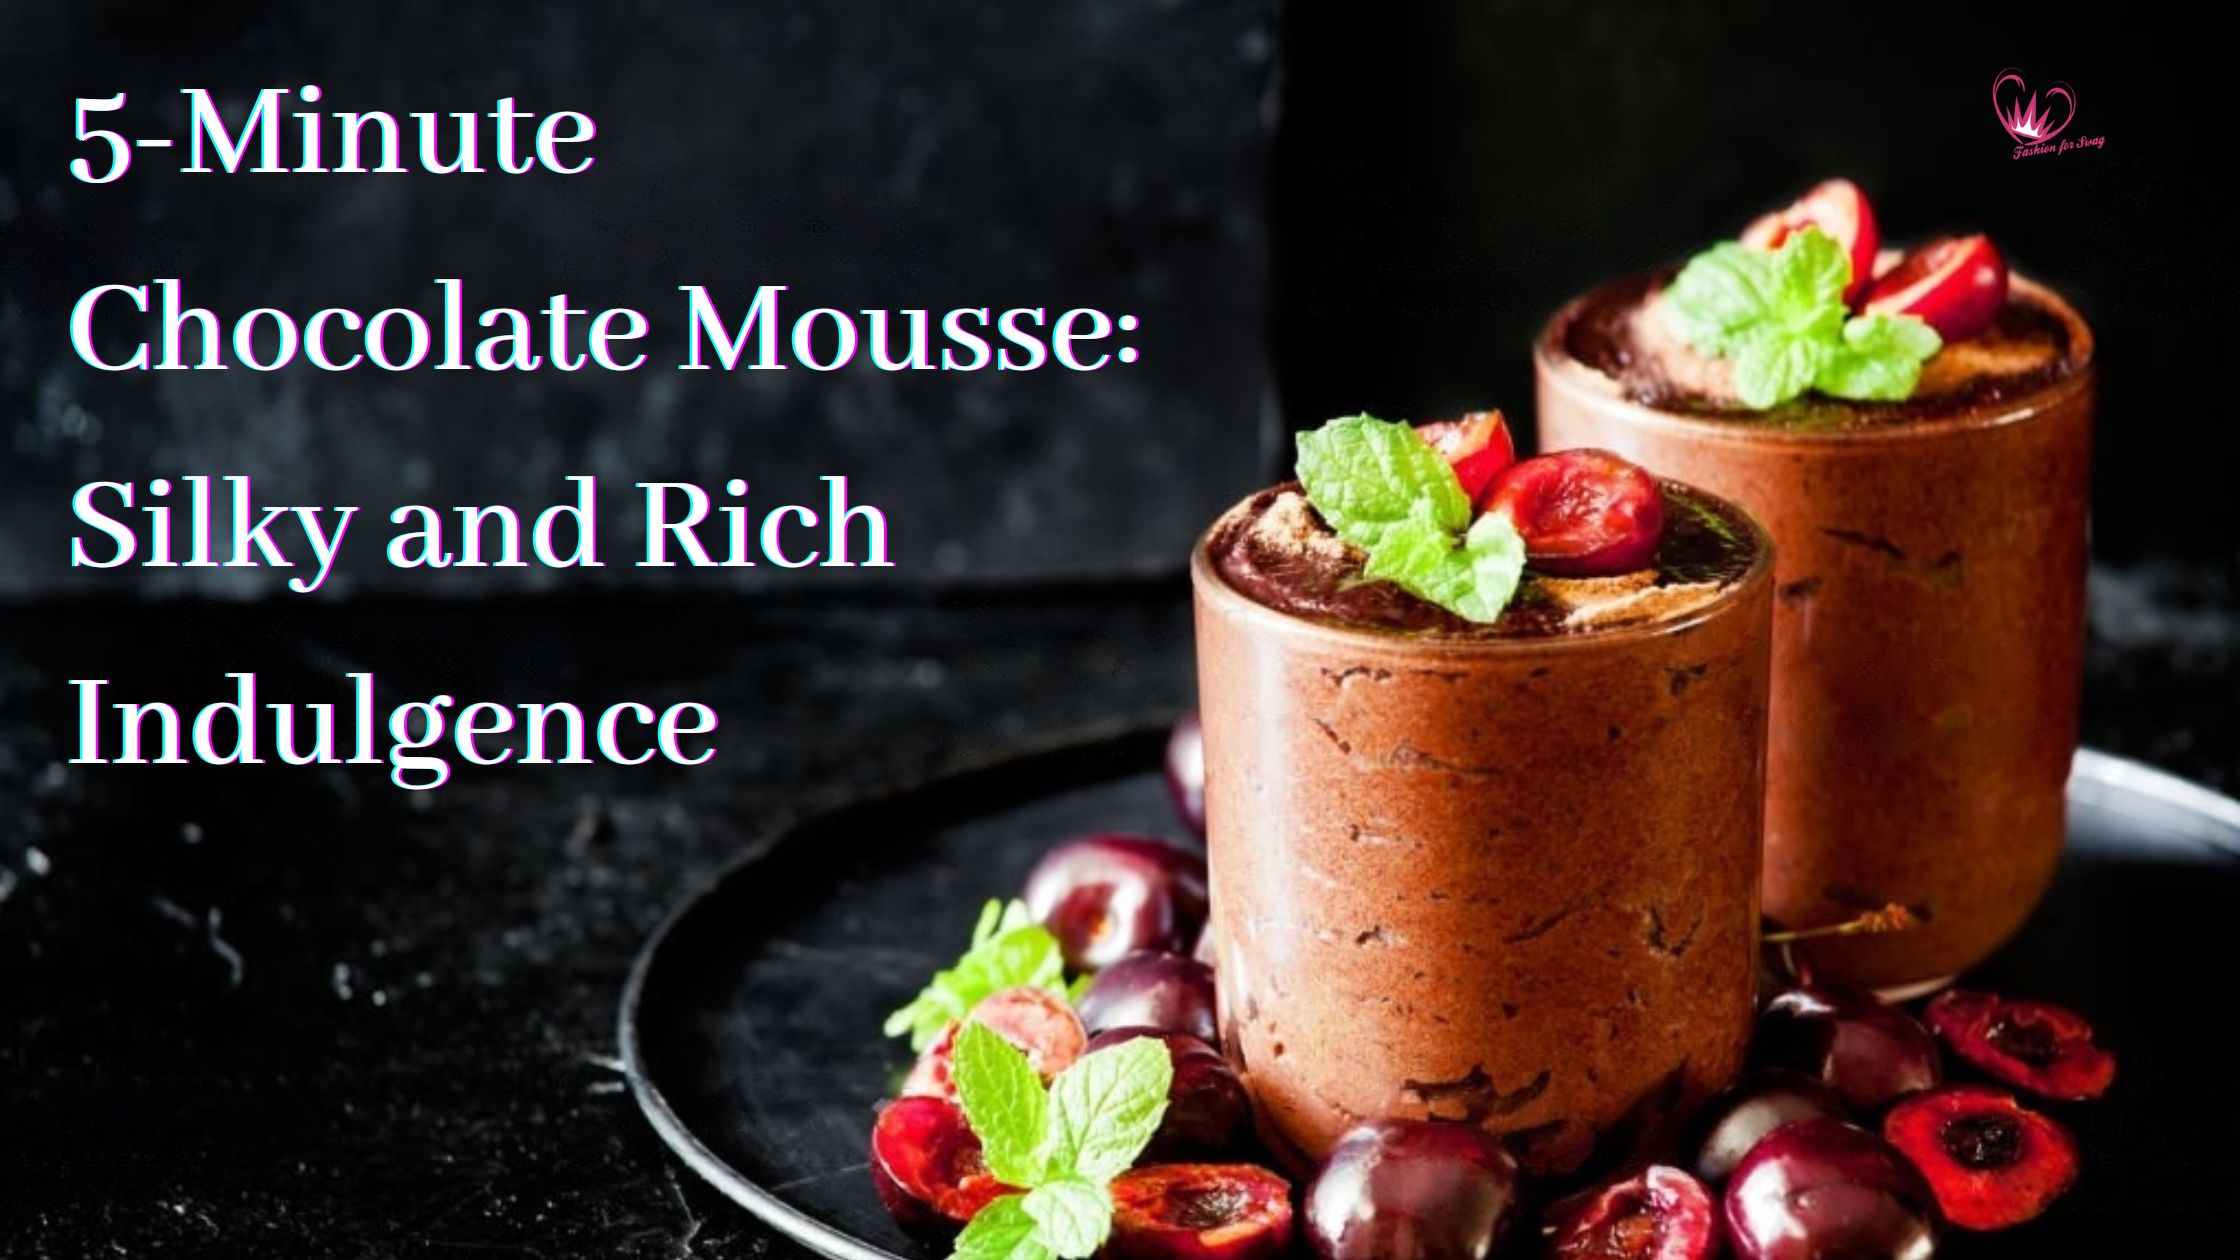 5-Minute Chocolate Mousse Recipe: Silky and Rich Indulgence